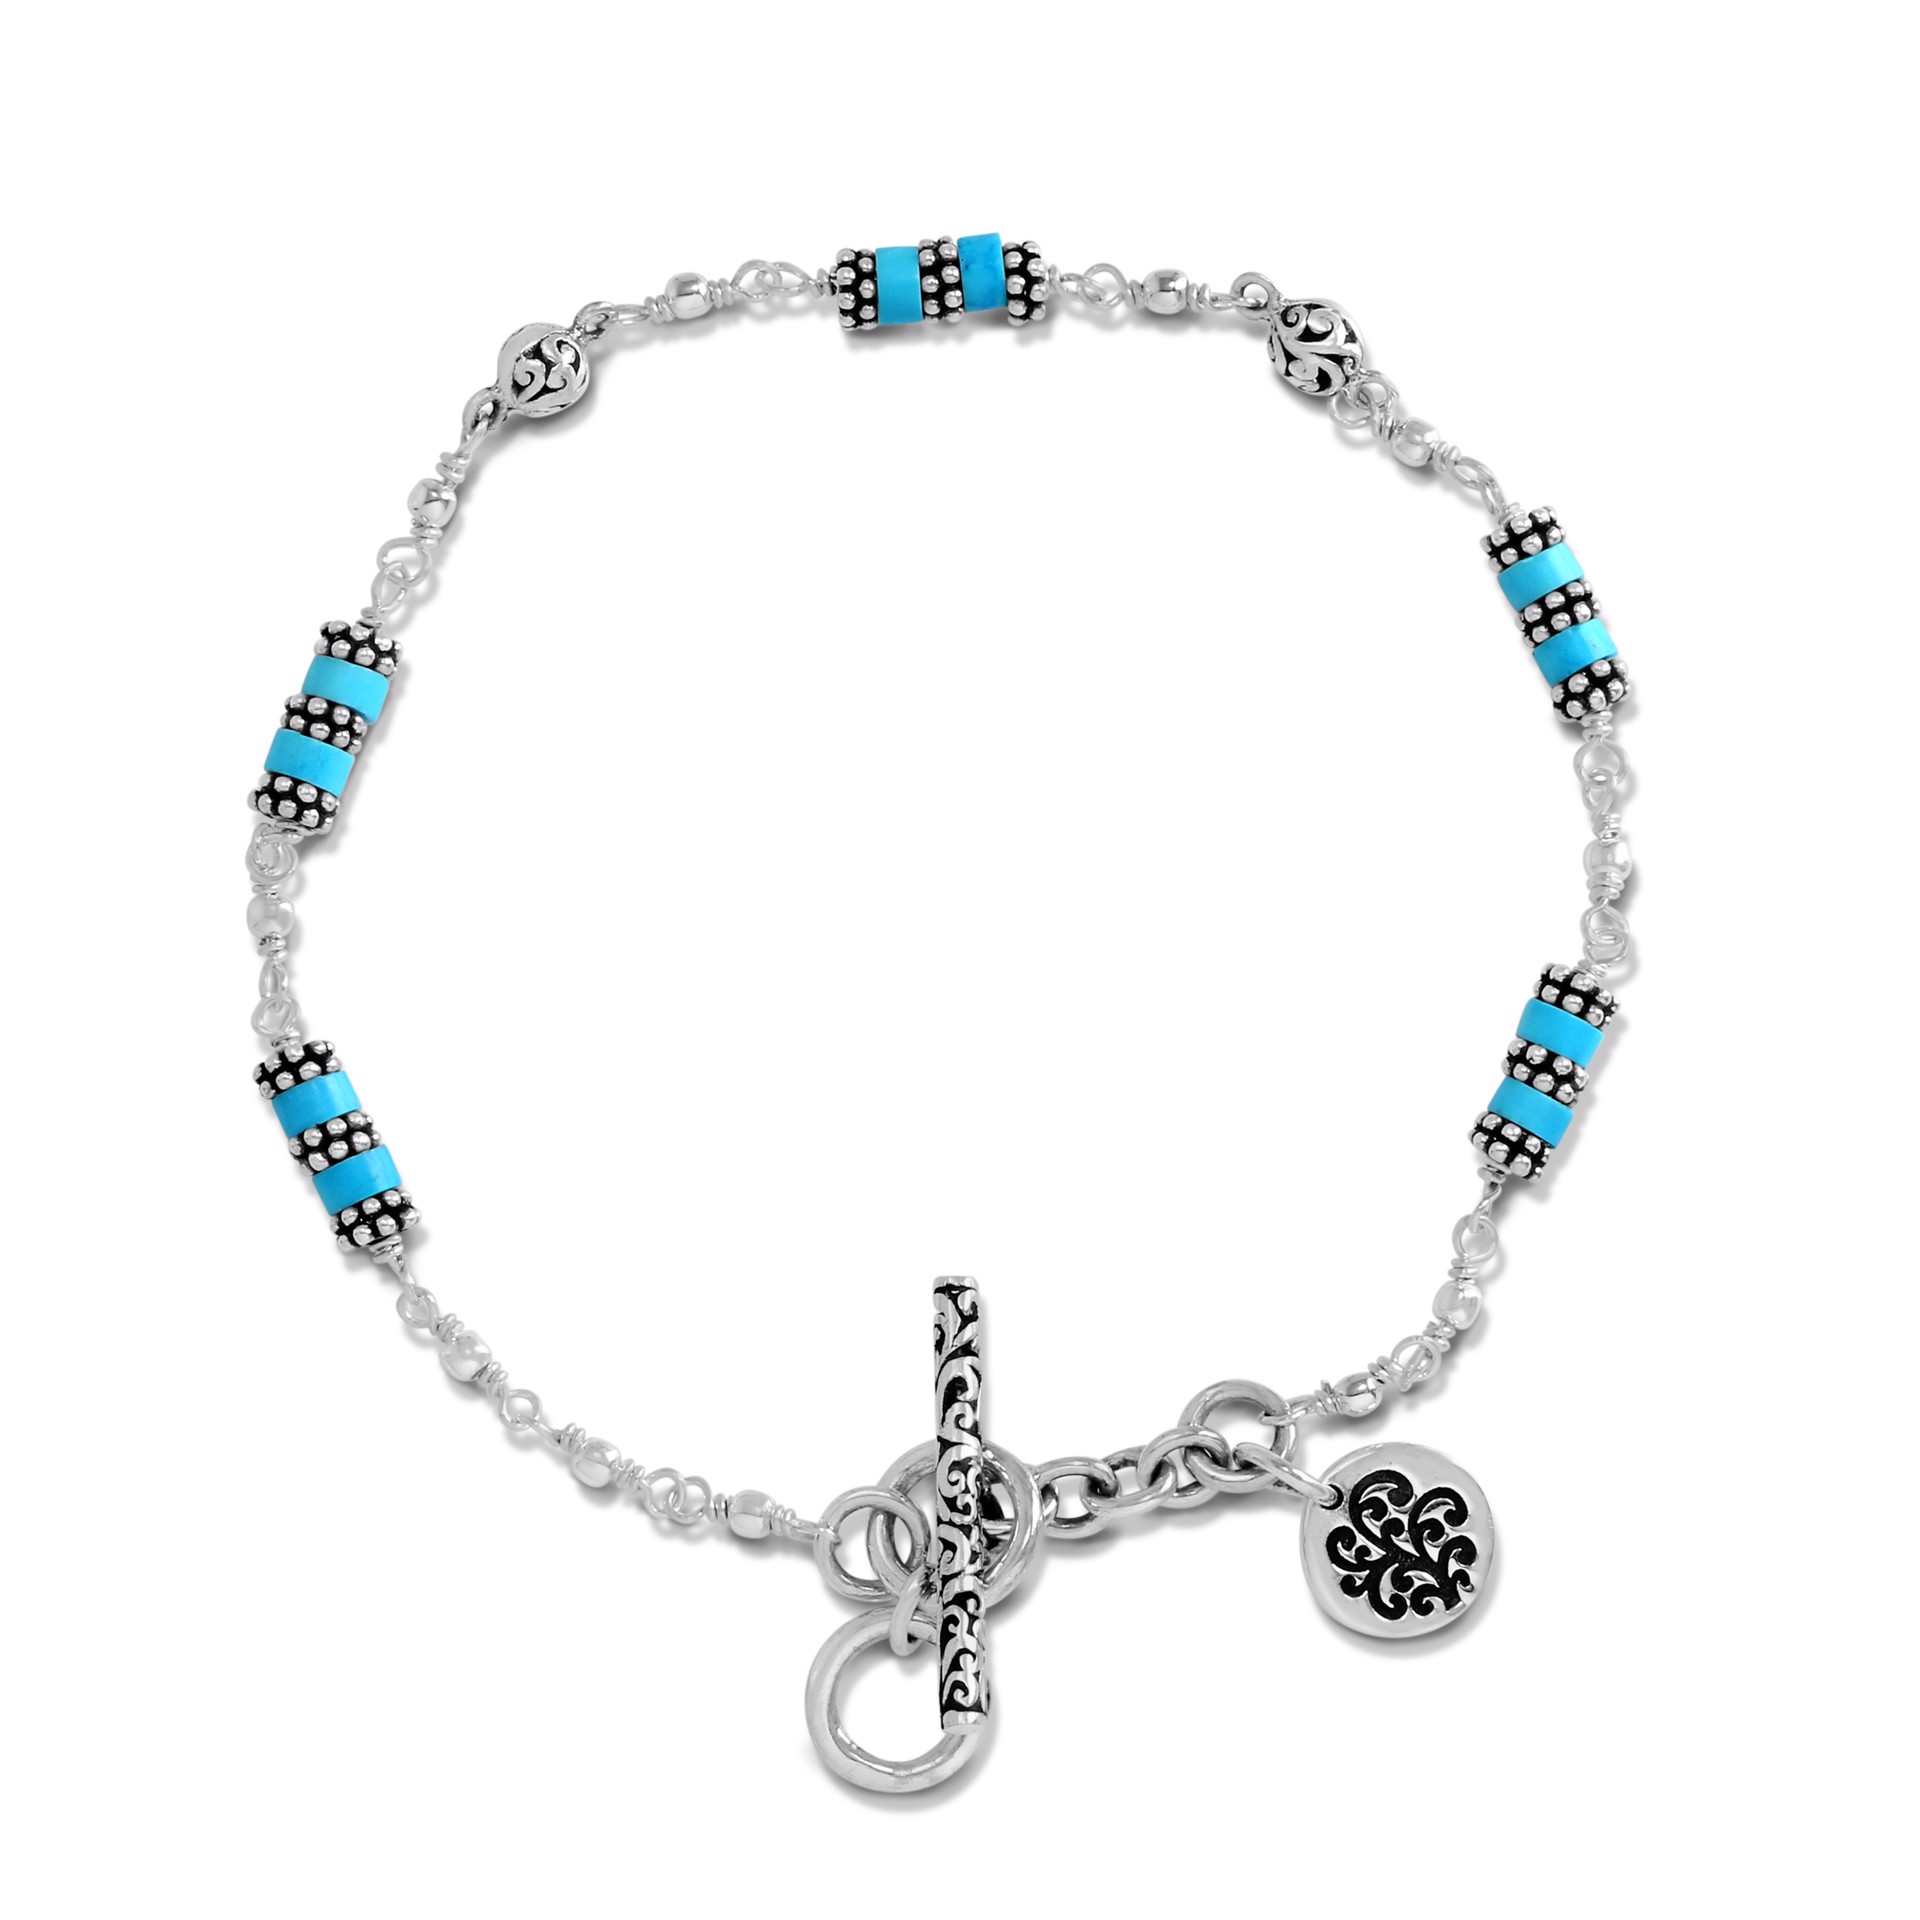 Sterling Silver Link Bracelet with Turquoise Beads by Lois Hill